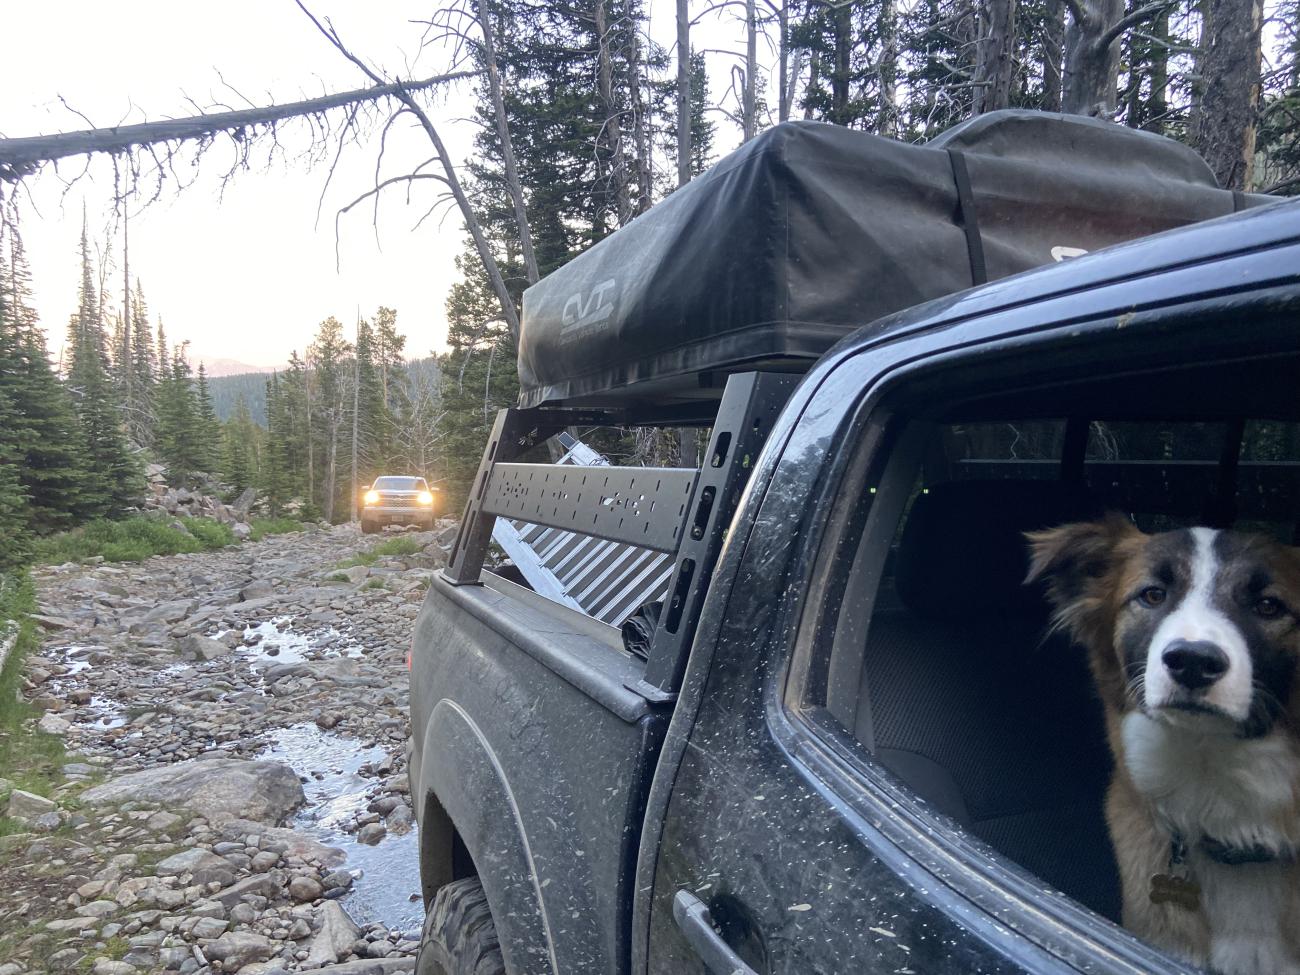 Midas during our off-roading adventure